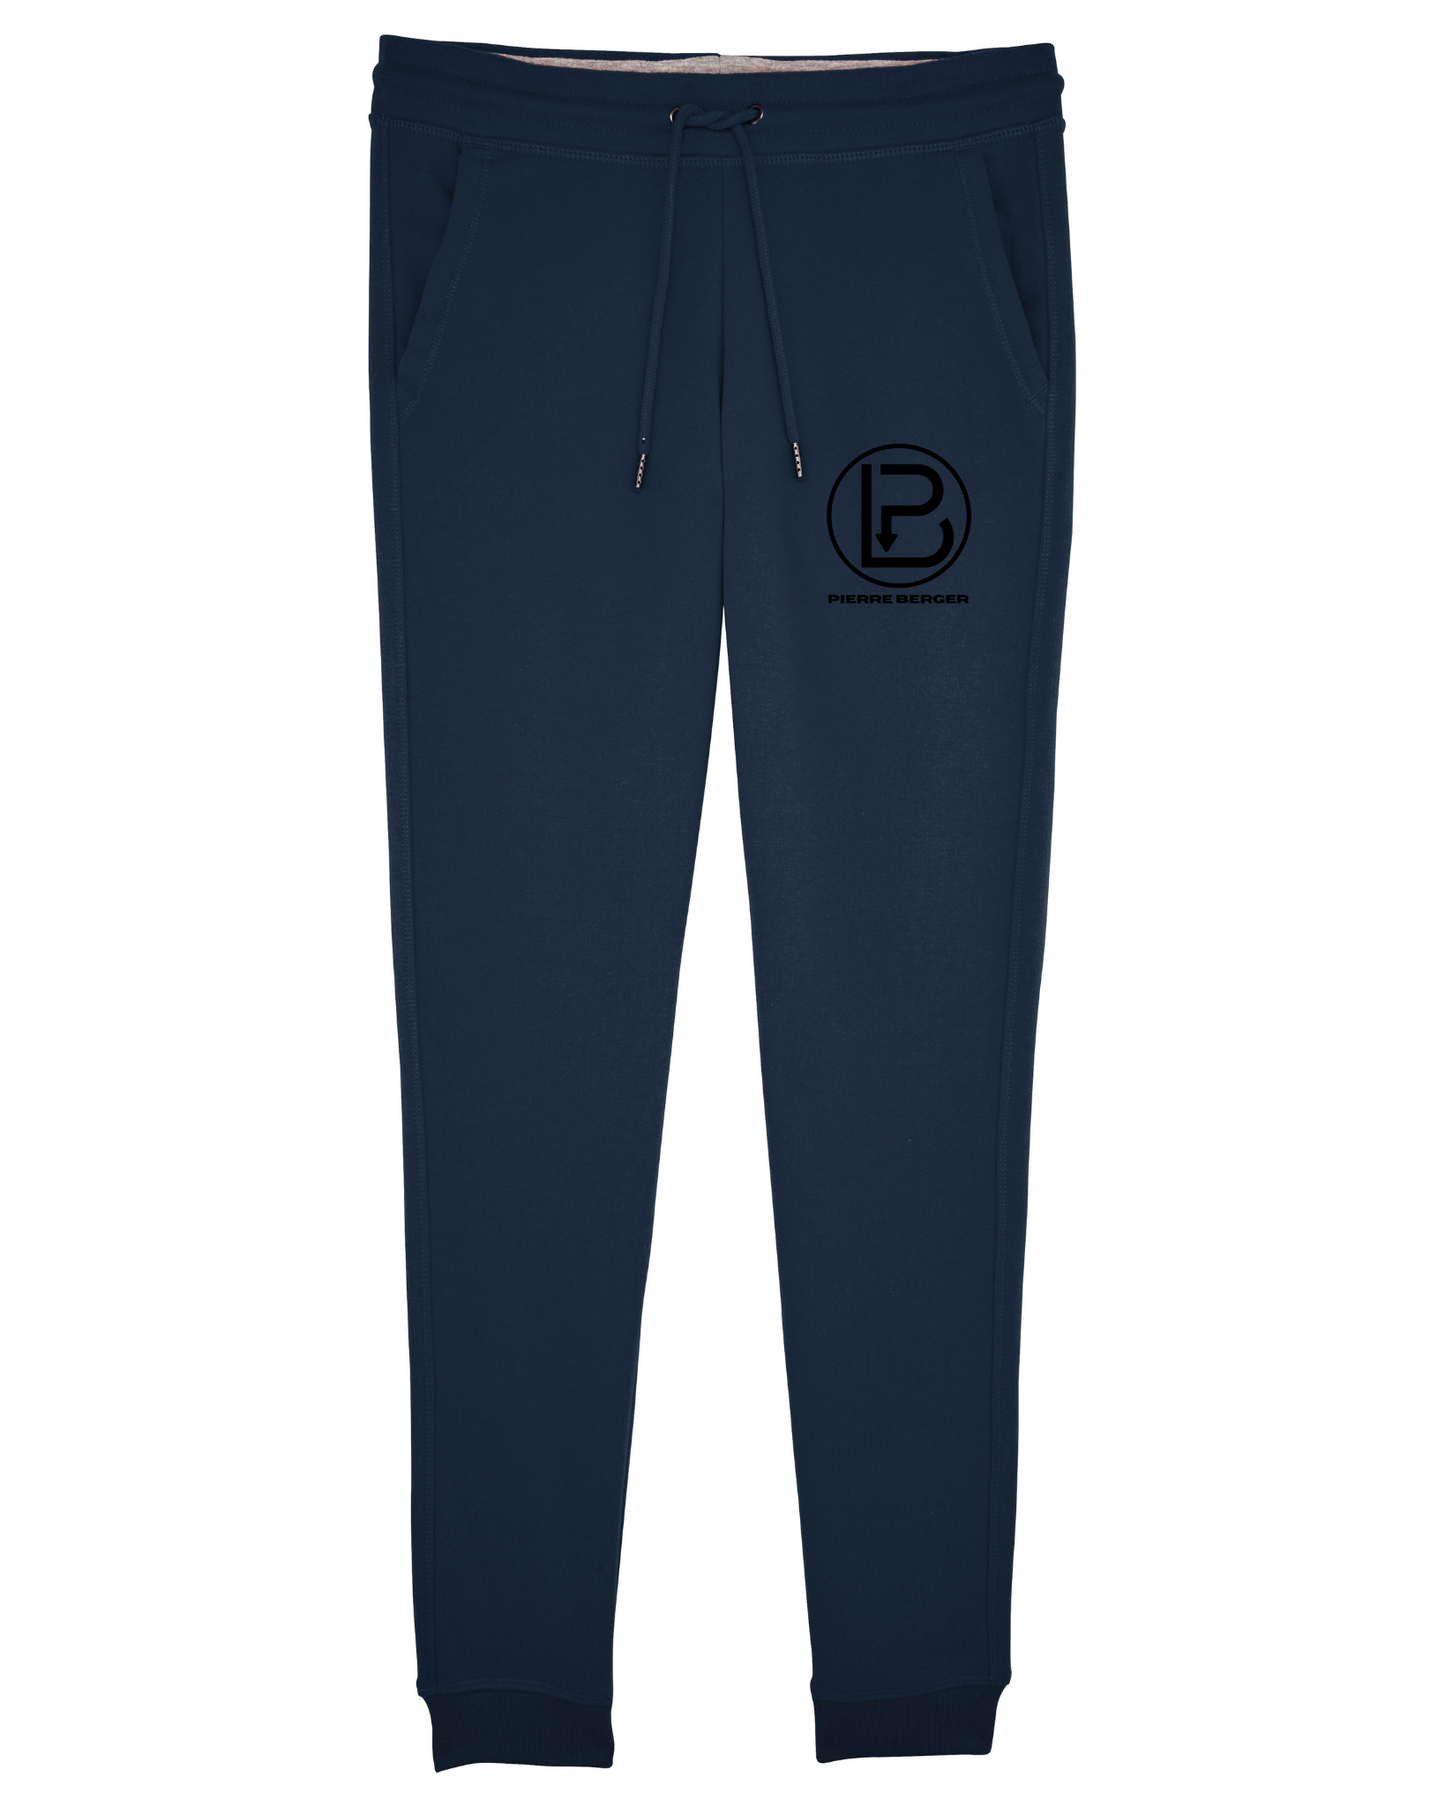 PIERRE BERGER - Women's jogging pants 100% recycled stick